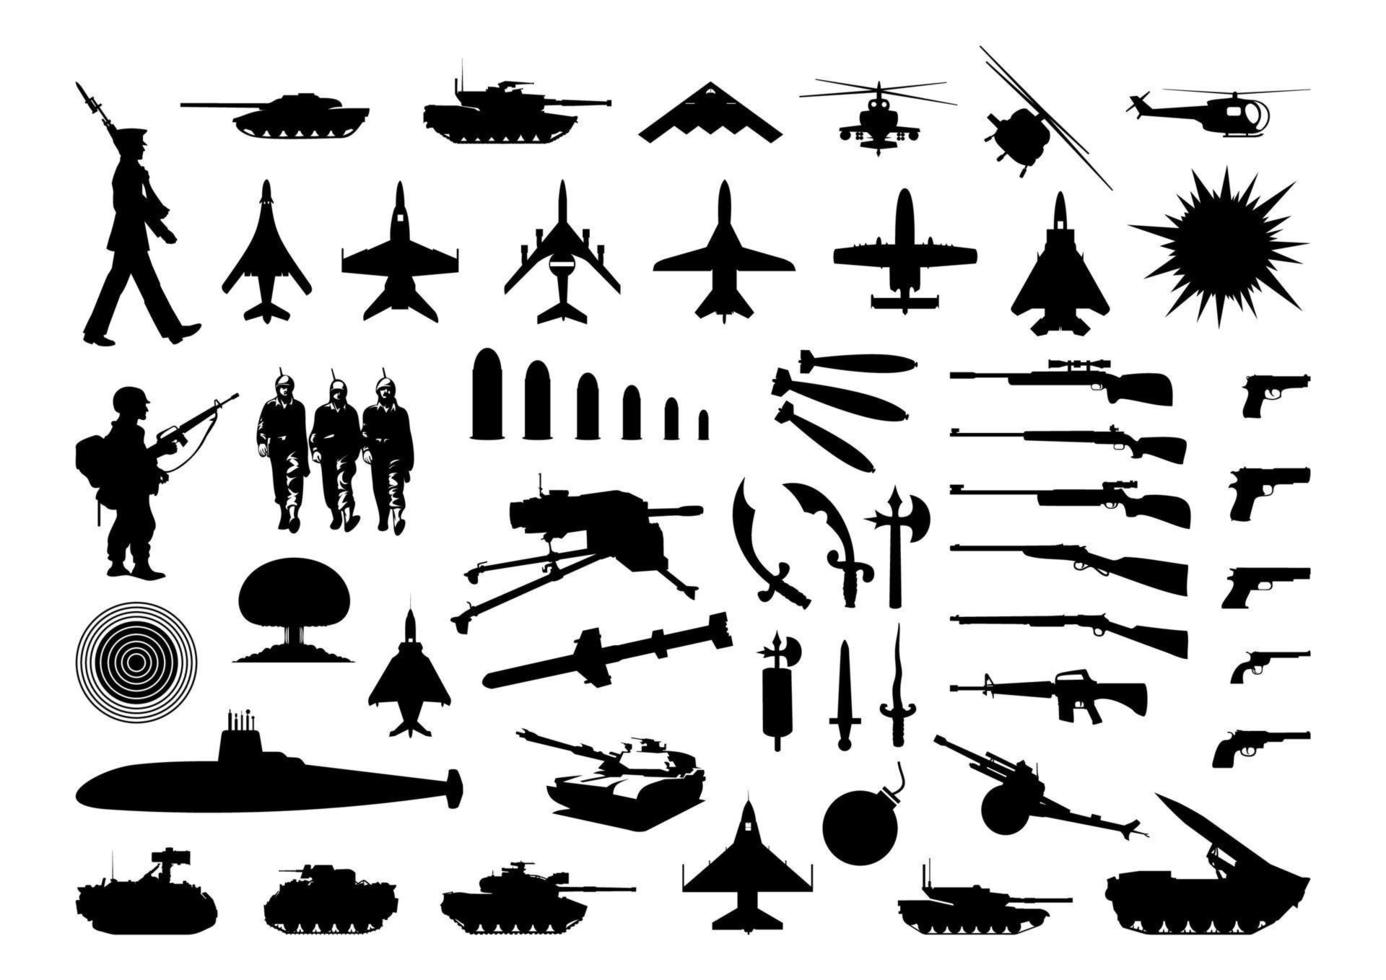 Silhouettes of the various weapon and engineering. A vector illustration